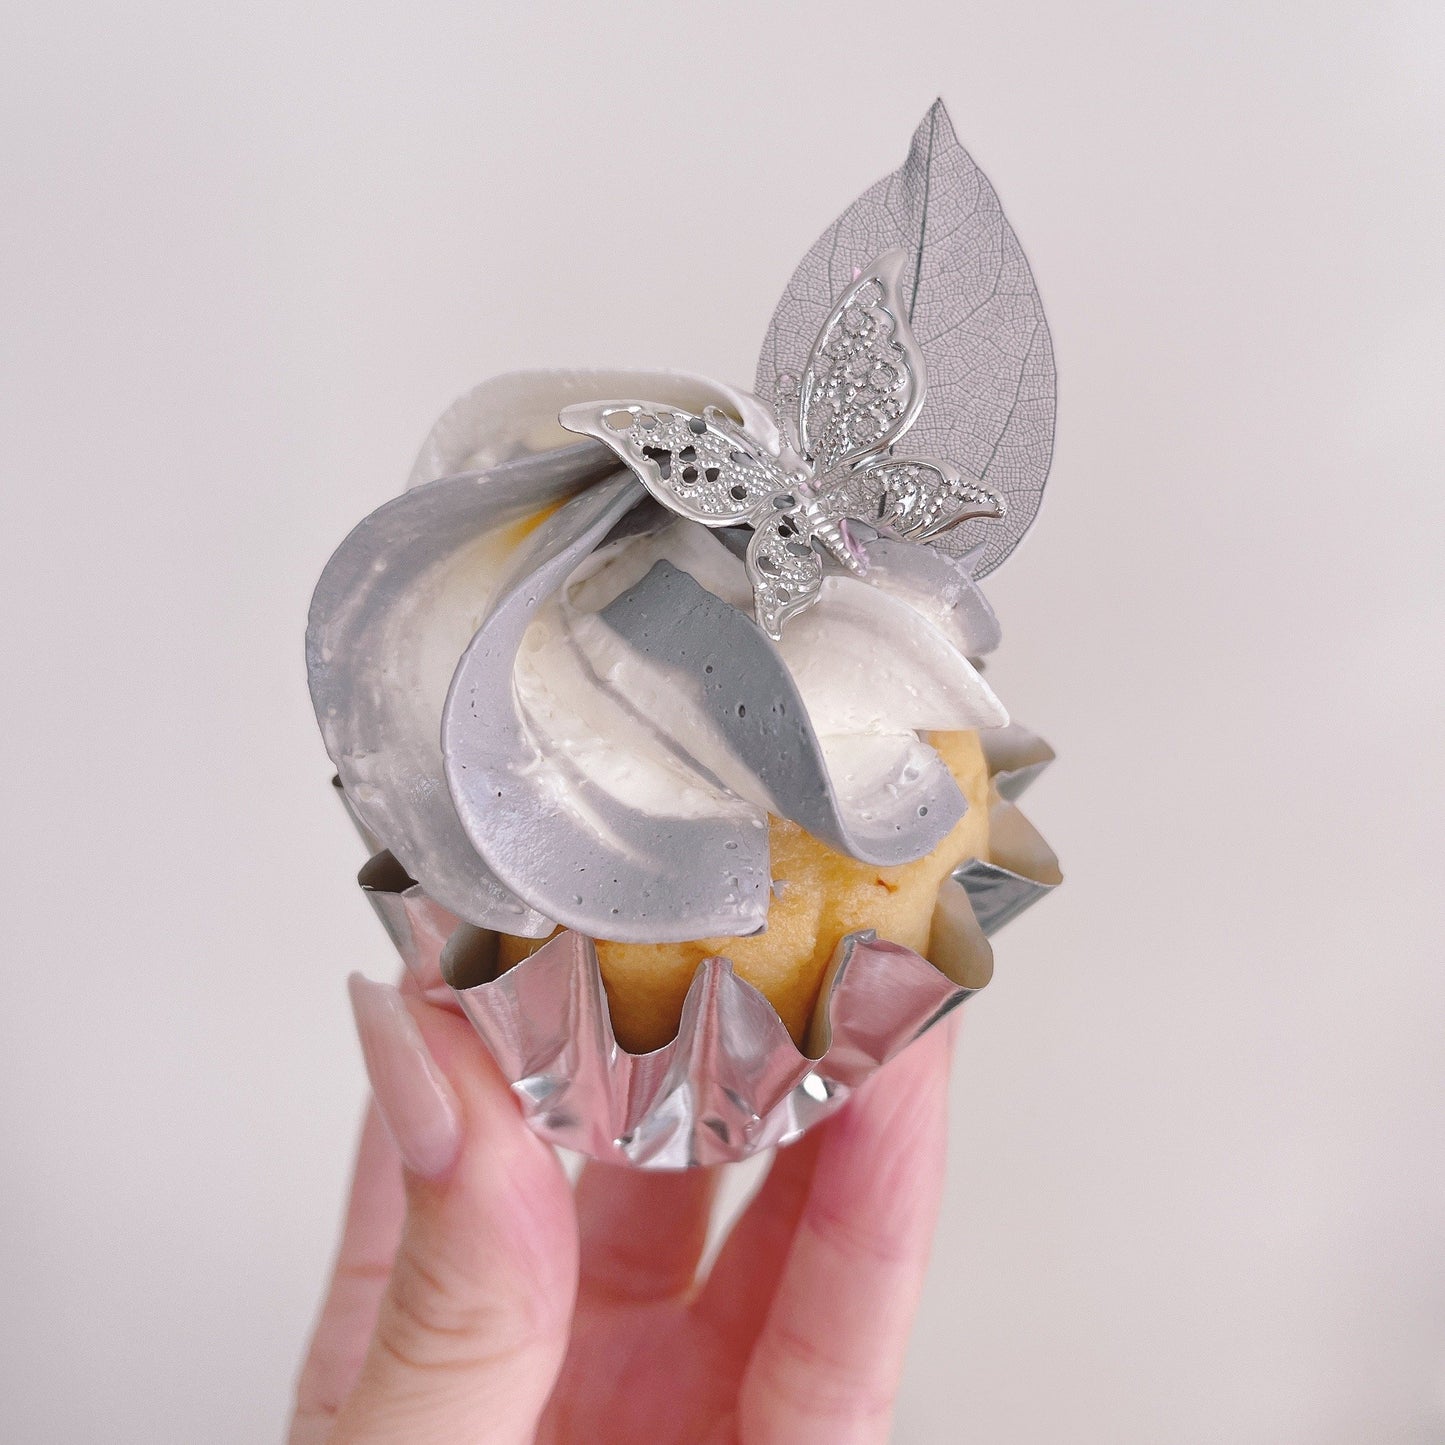 More Cuppies Silver Foil (Select from Pack Sizes)